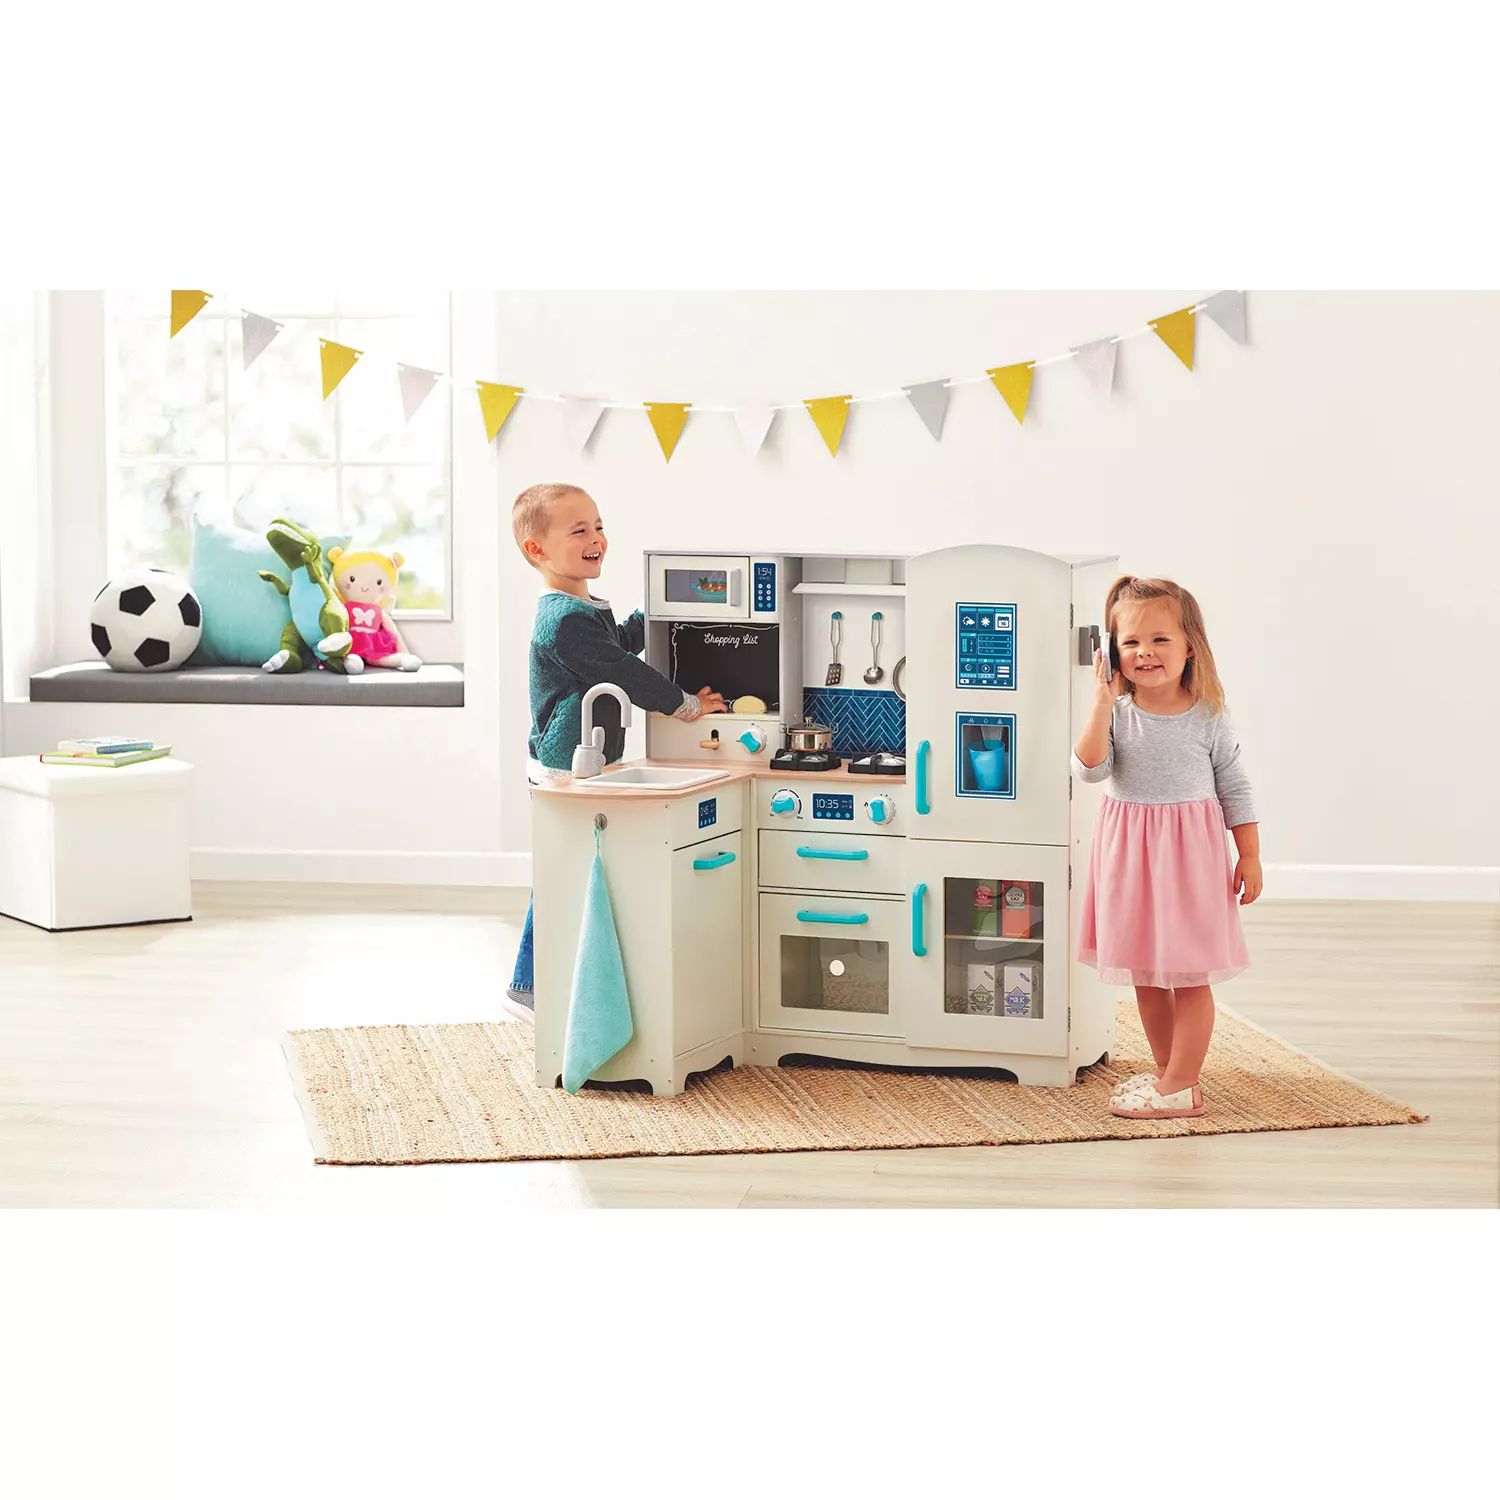 Member's Mark Deluxe Wooden Kitchen Play Center | Sam's Club